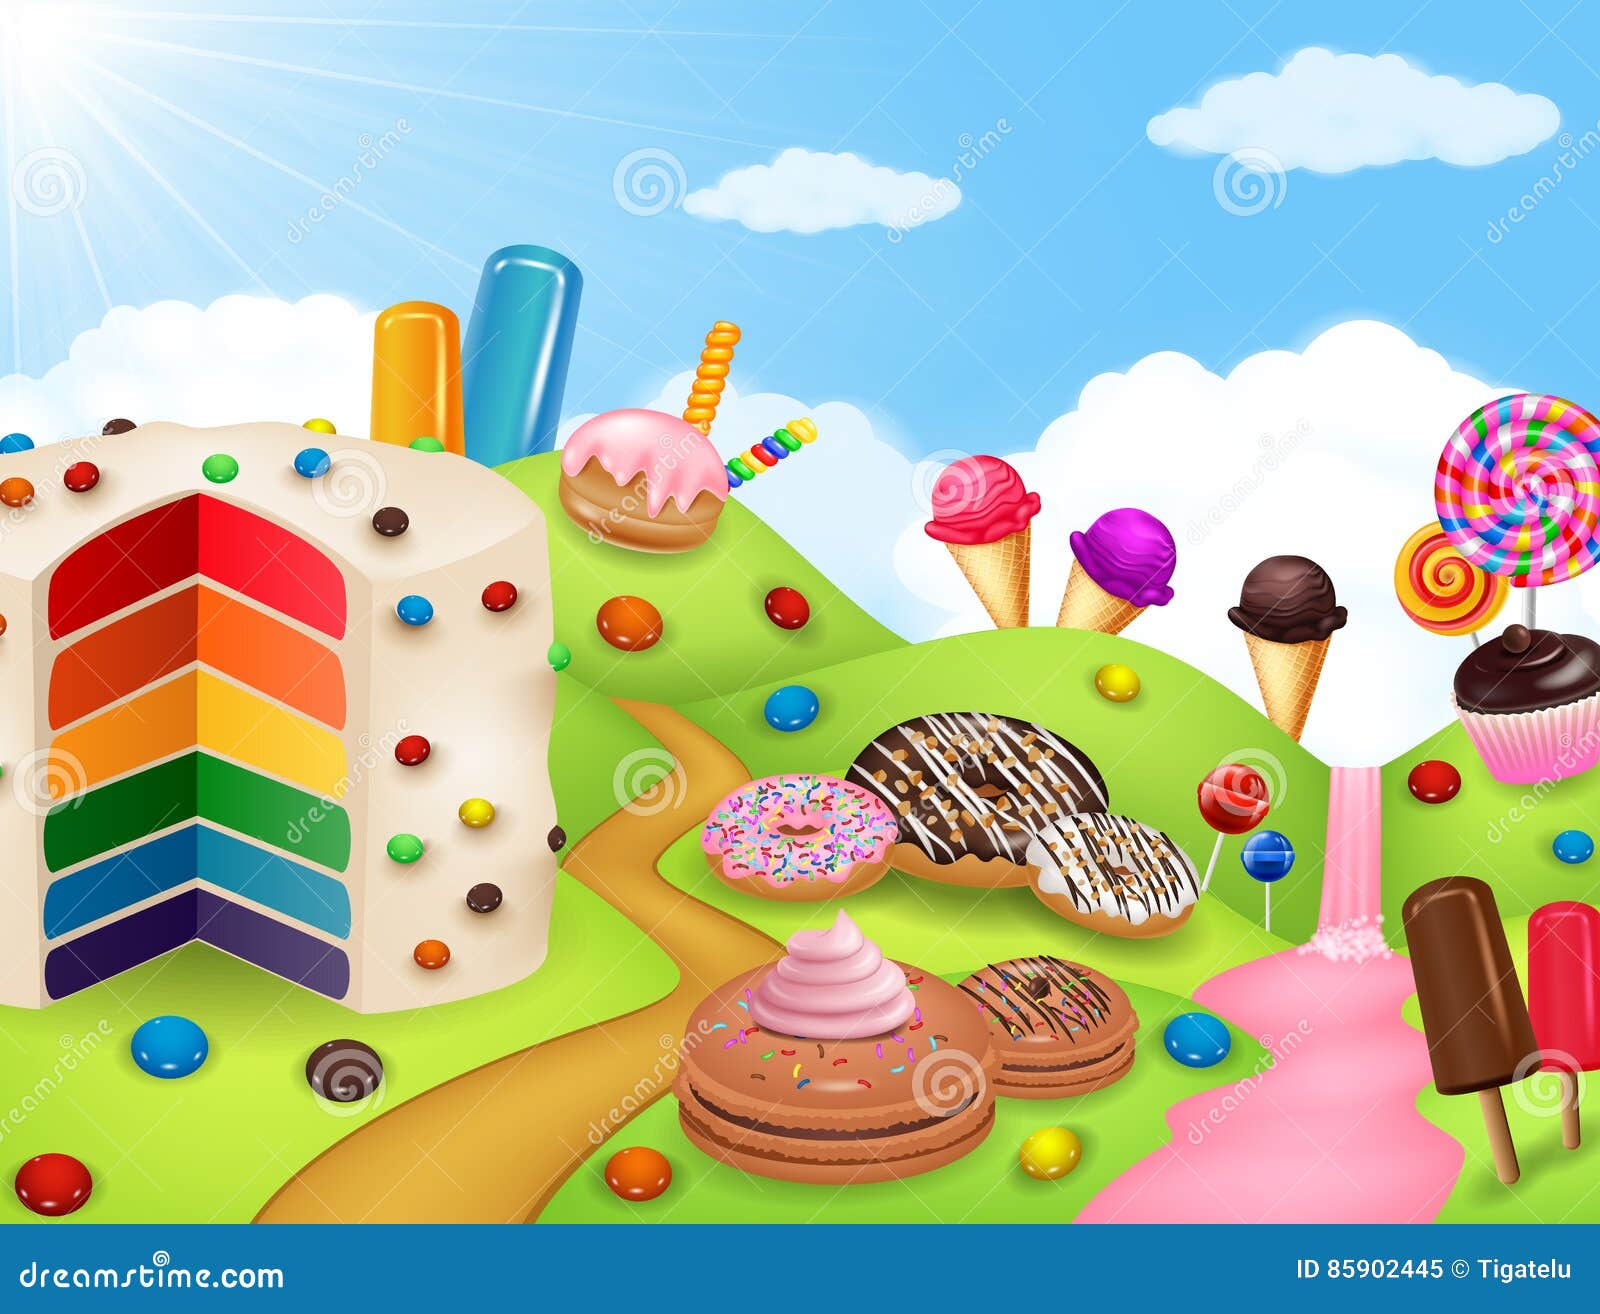 fantasy candyland with dessrts and sweets